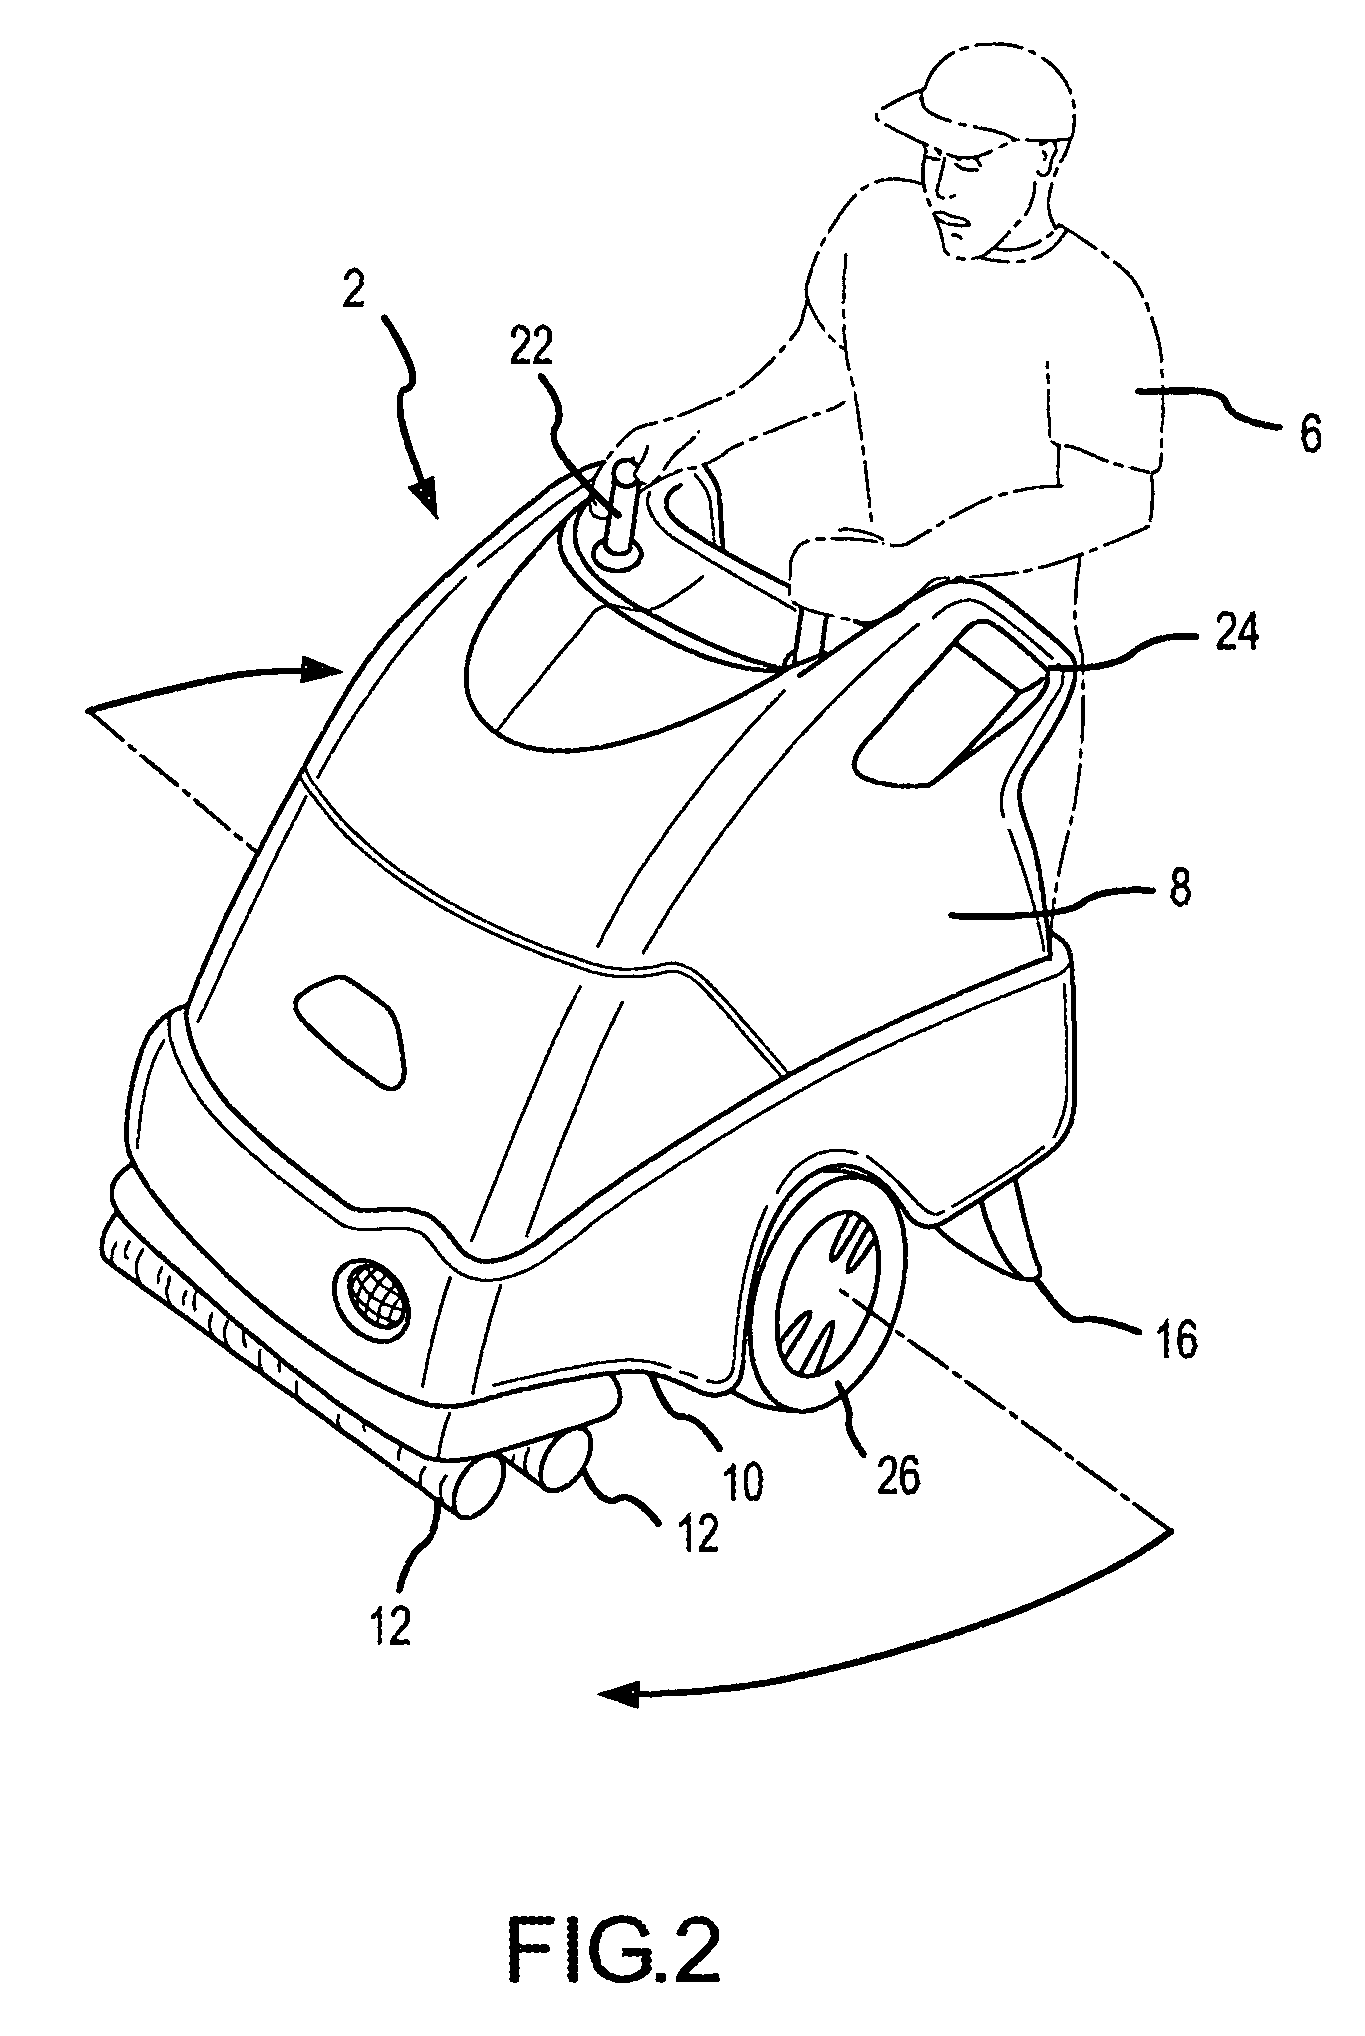 Floating deck for use with a floor cleaning apparatus